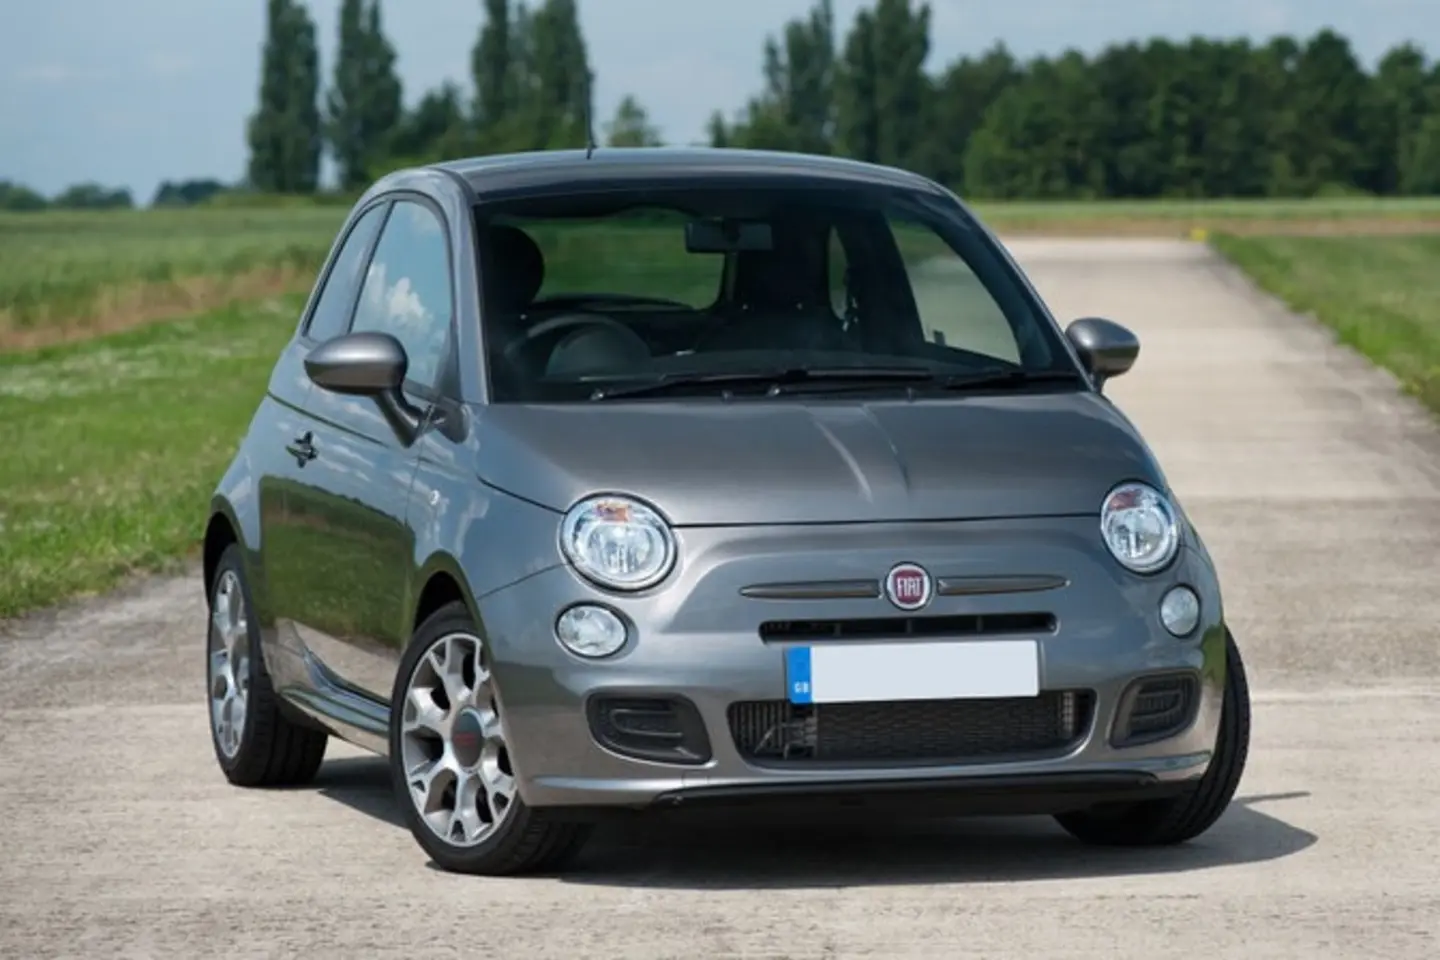 The exterior of a grey Fiat 500